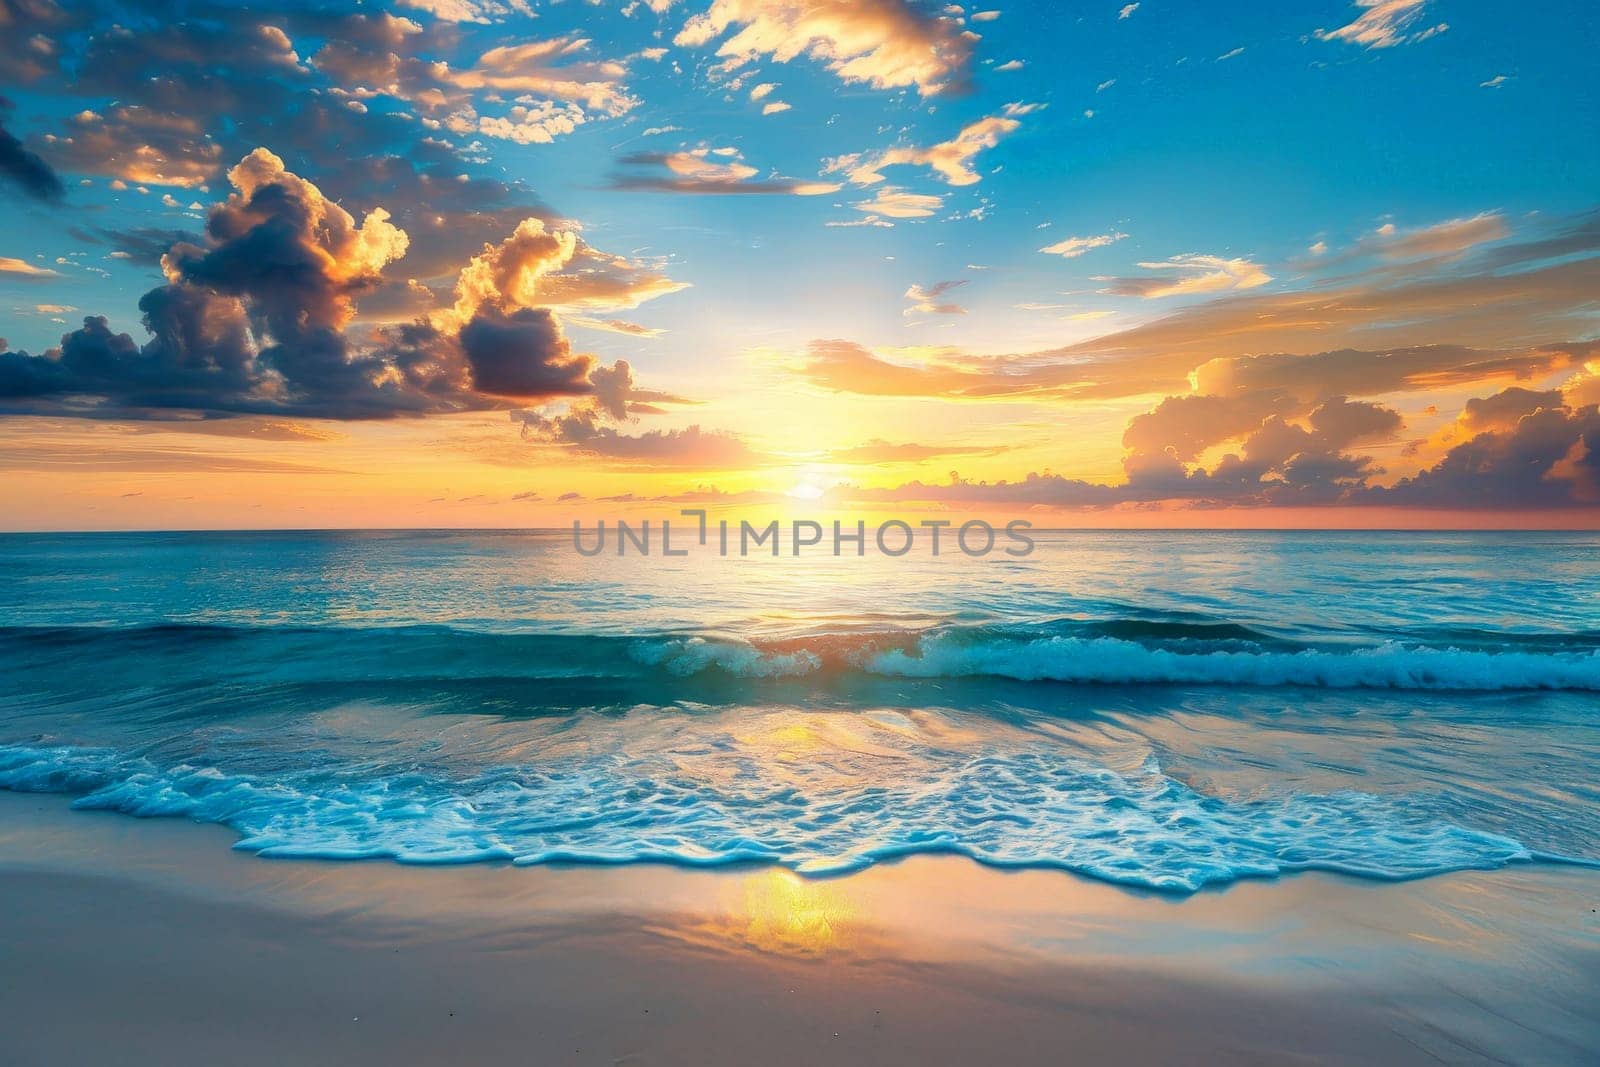 A sunset painting depicts waves crashing on the shore as the sun rises above the horizon.